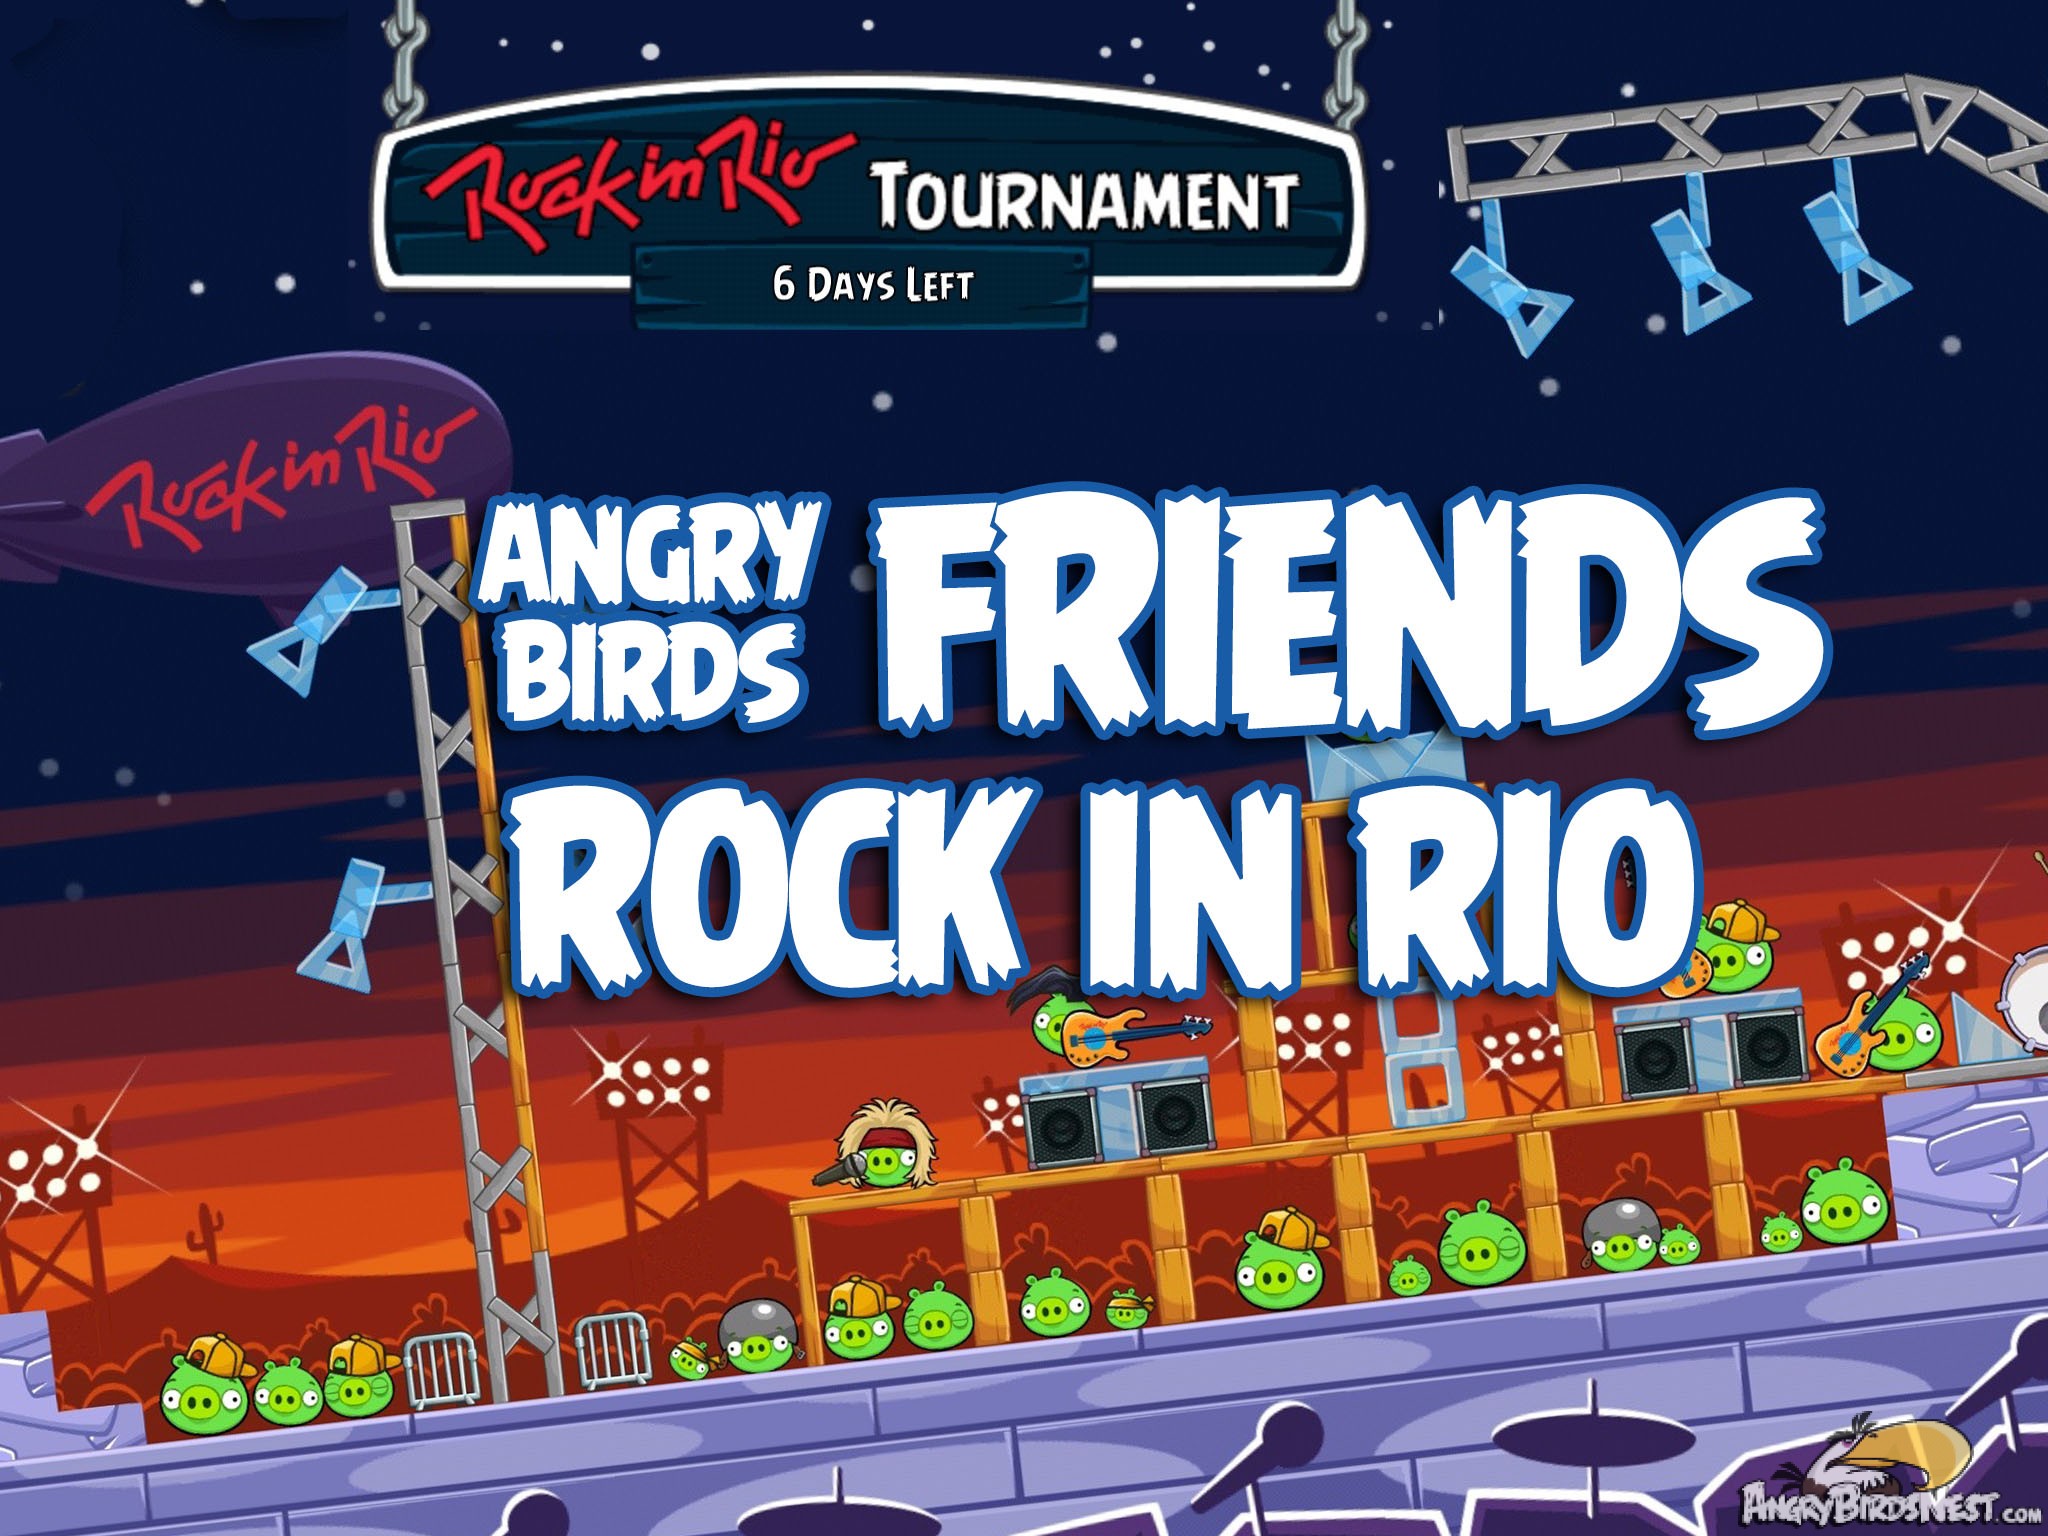 Angry Birds Friends Rock in Rio Tournament Feature Image